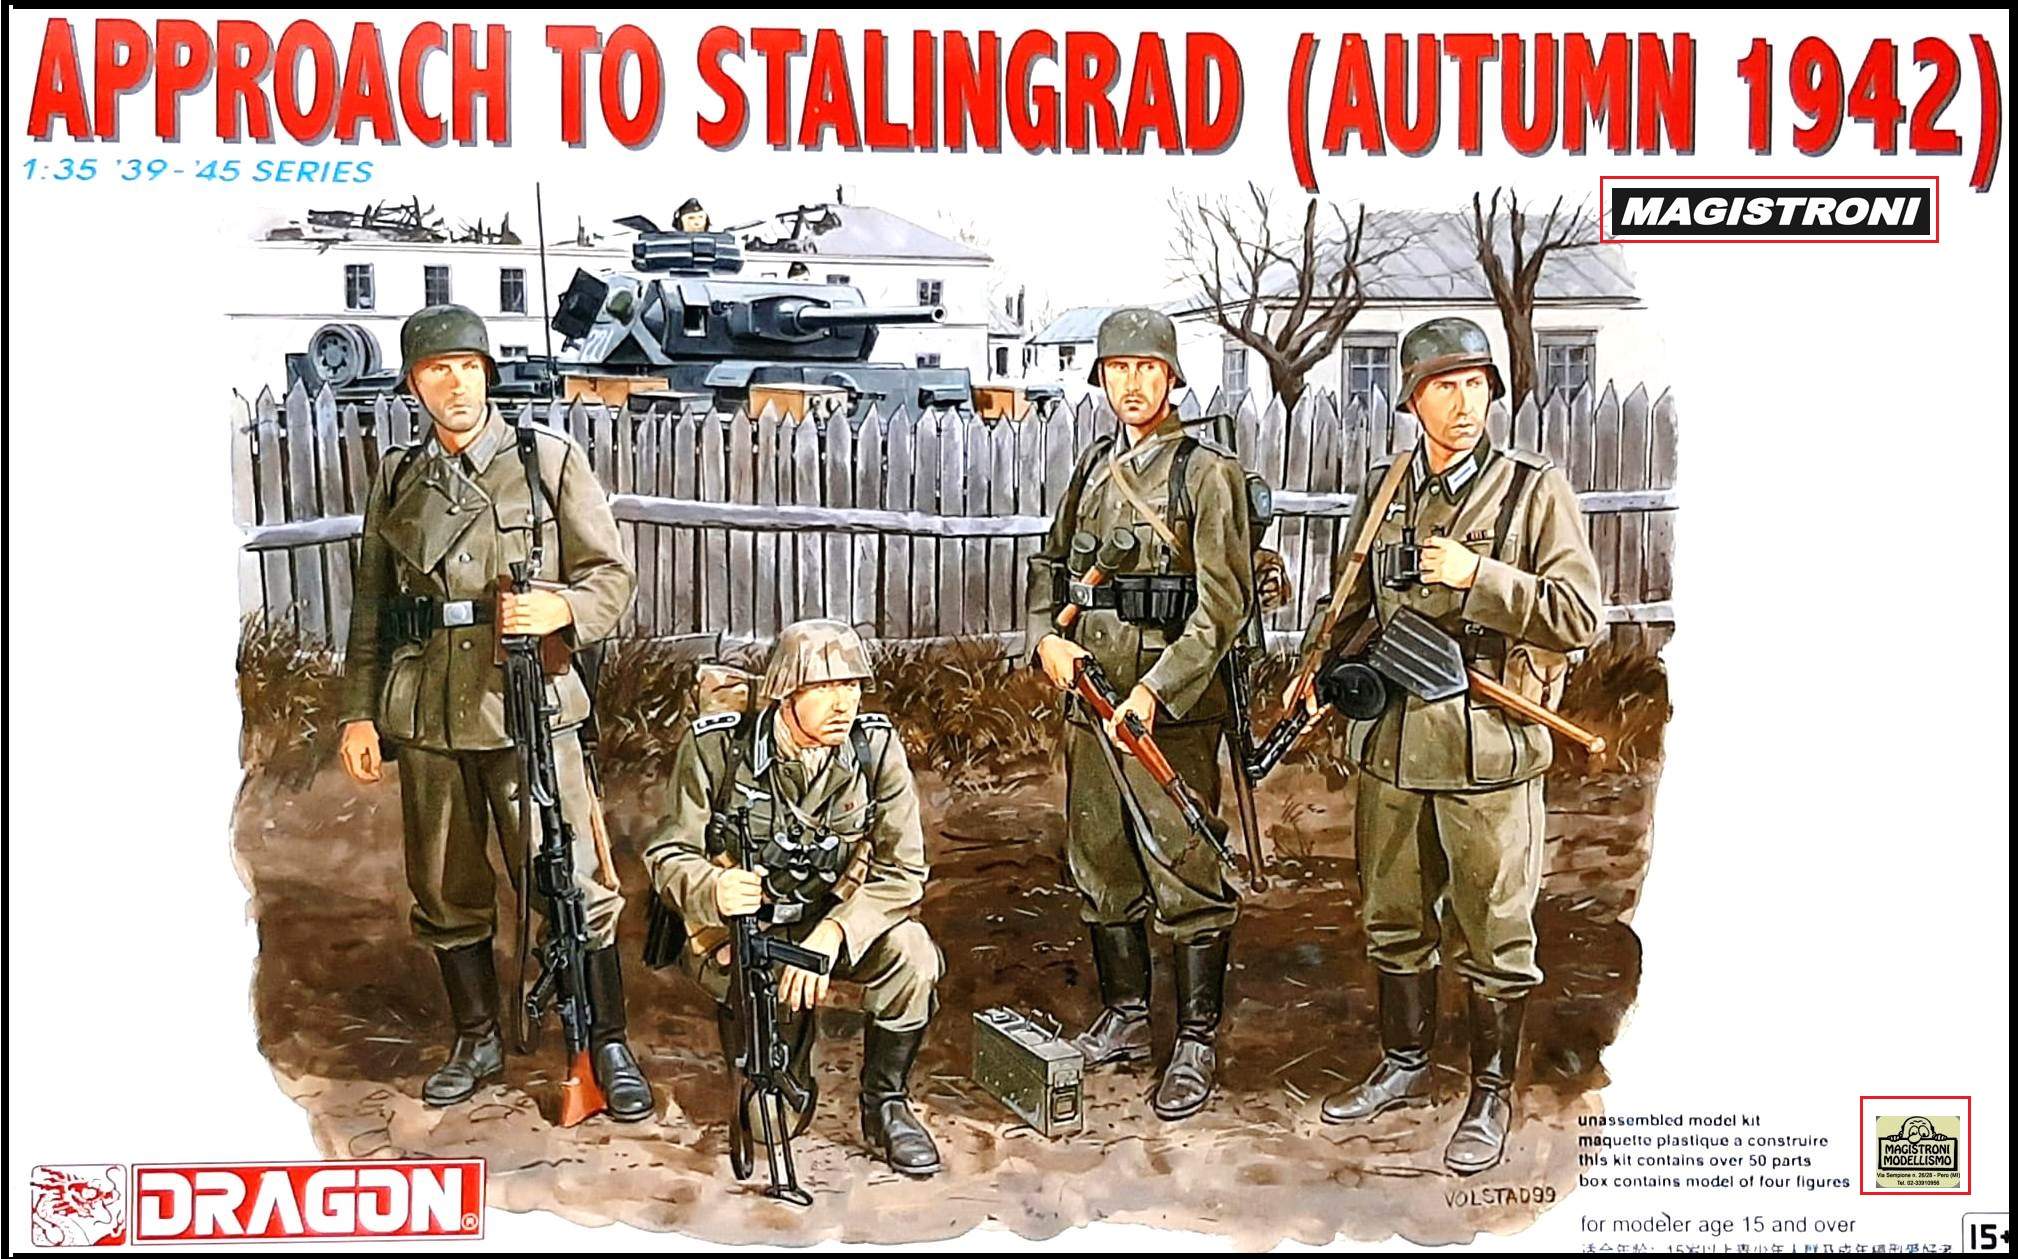 APPROACH TO STALINGRAD (Autum 1942)